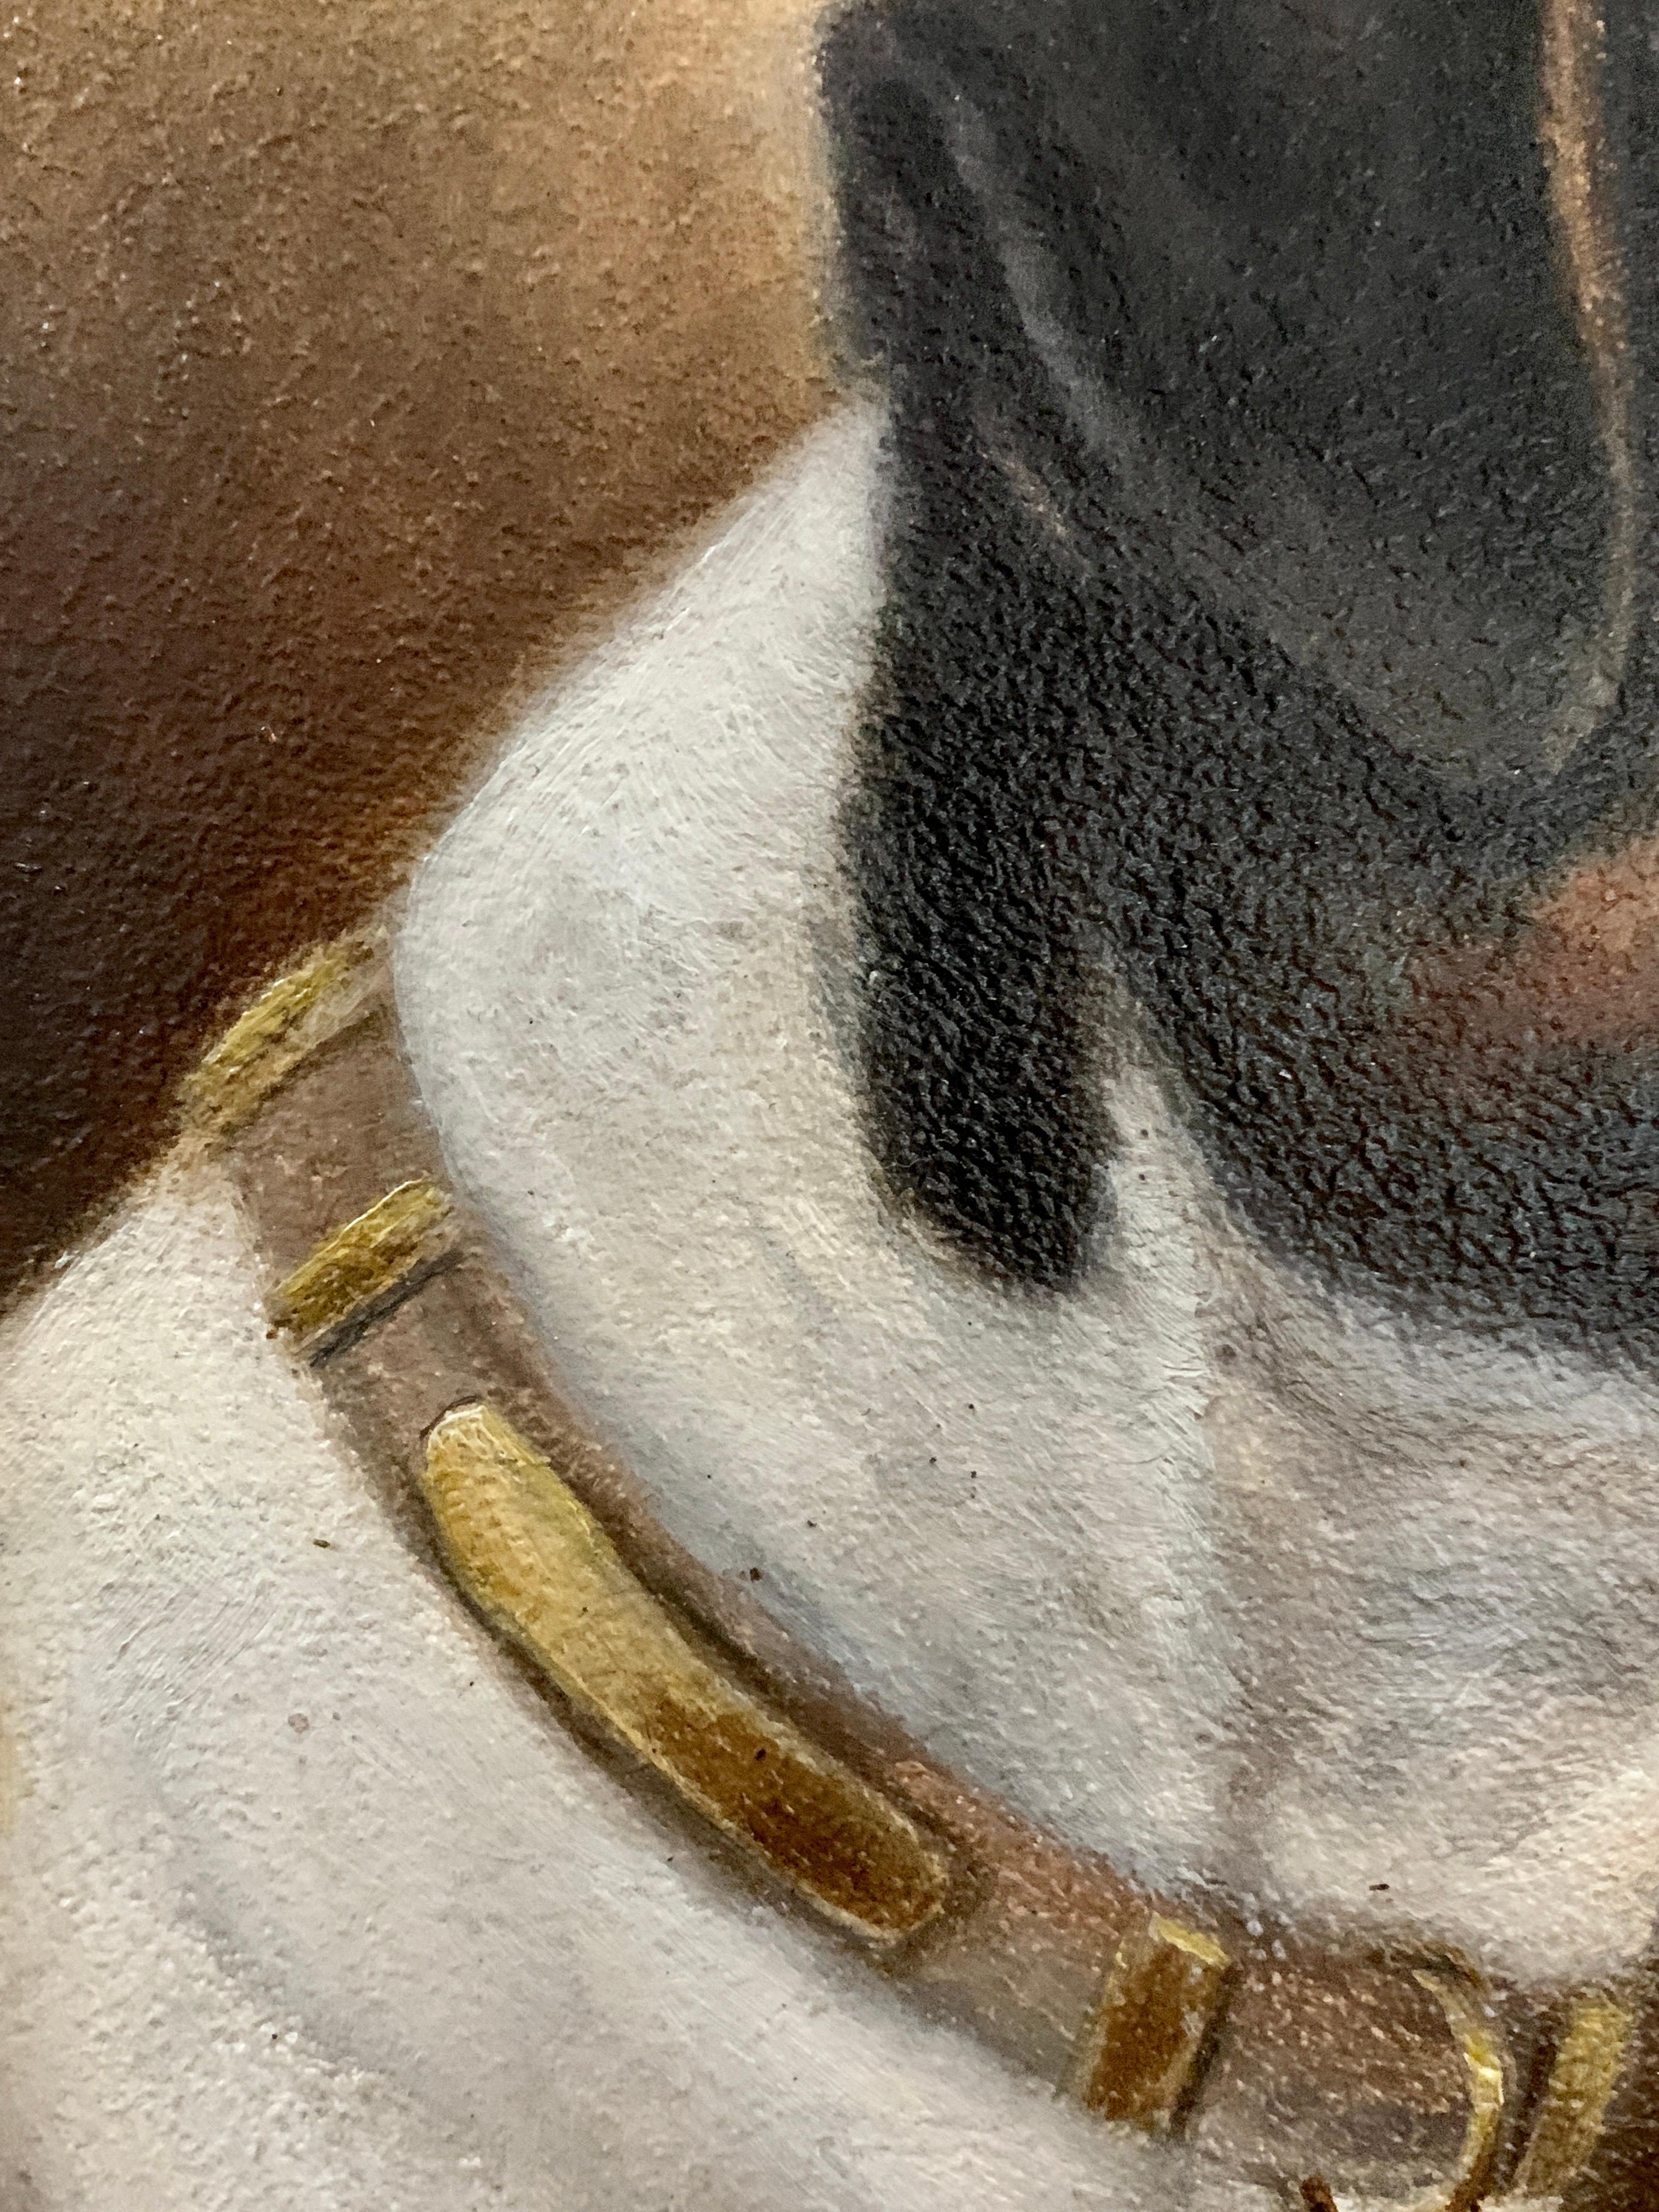 Wonderful head portrait of a Jack Russell Terrier dog. 

Edward Aistrop was a painter of dog portraits who worked in the latter part of the 19th century. He was amongst a band of artists who fulfilled the demand of wealthy patrons by providing a